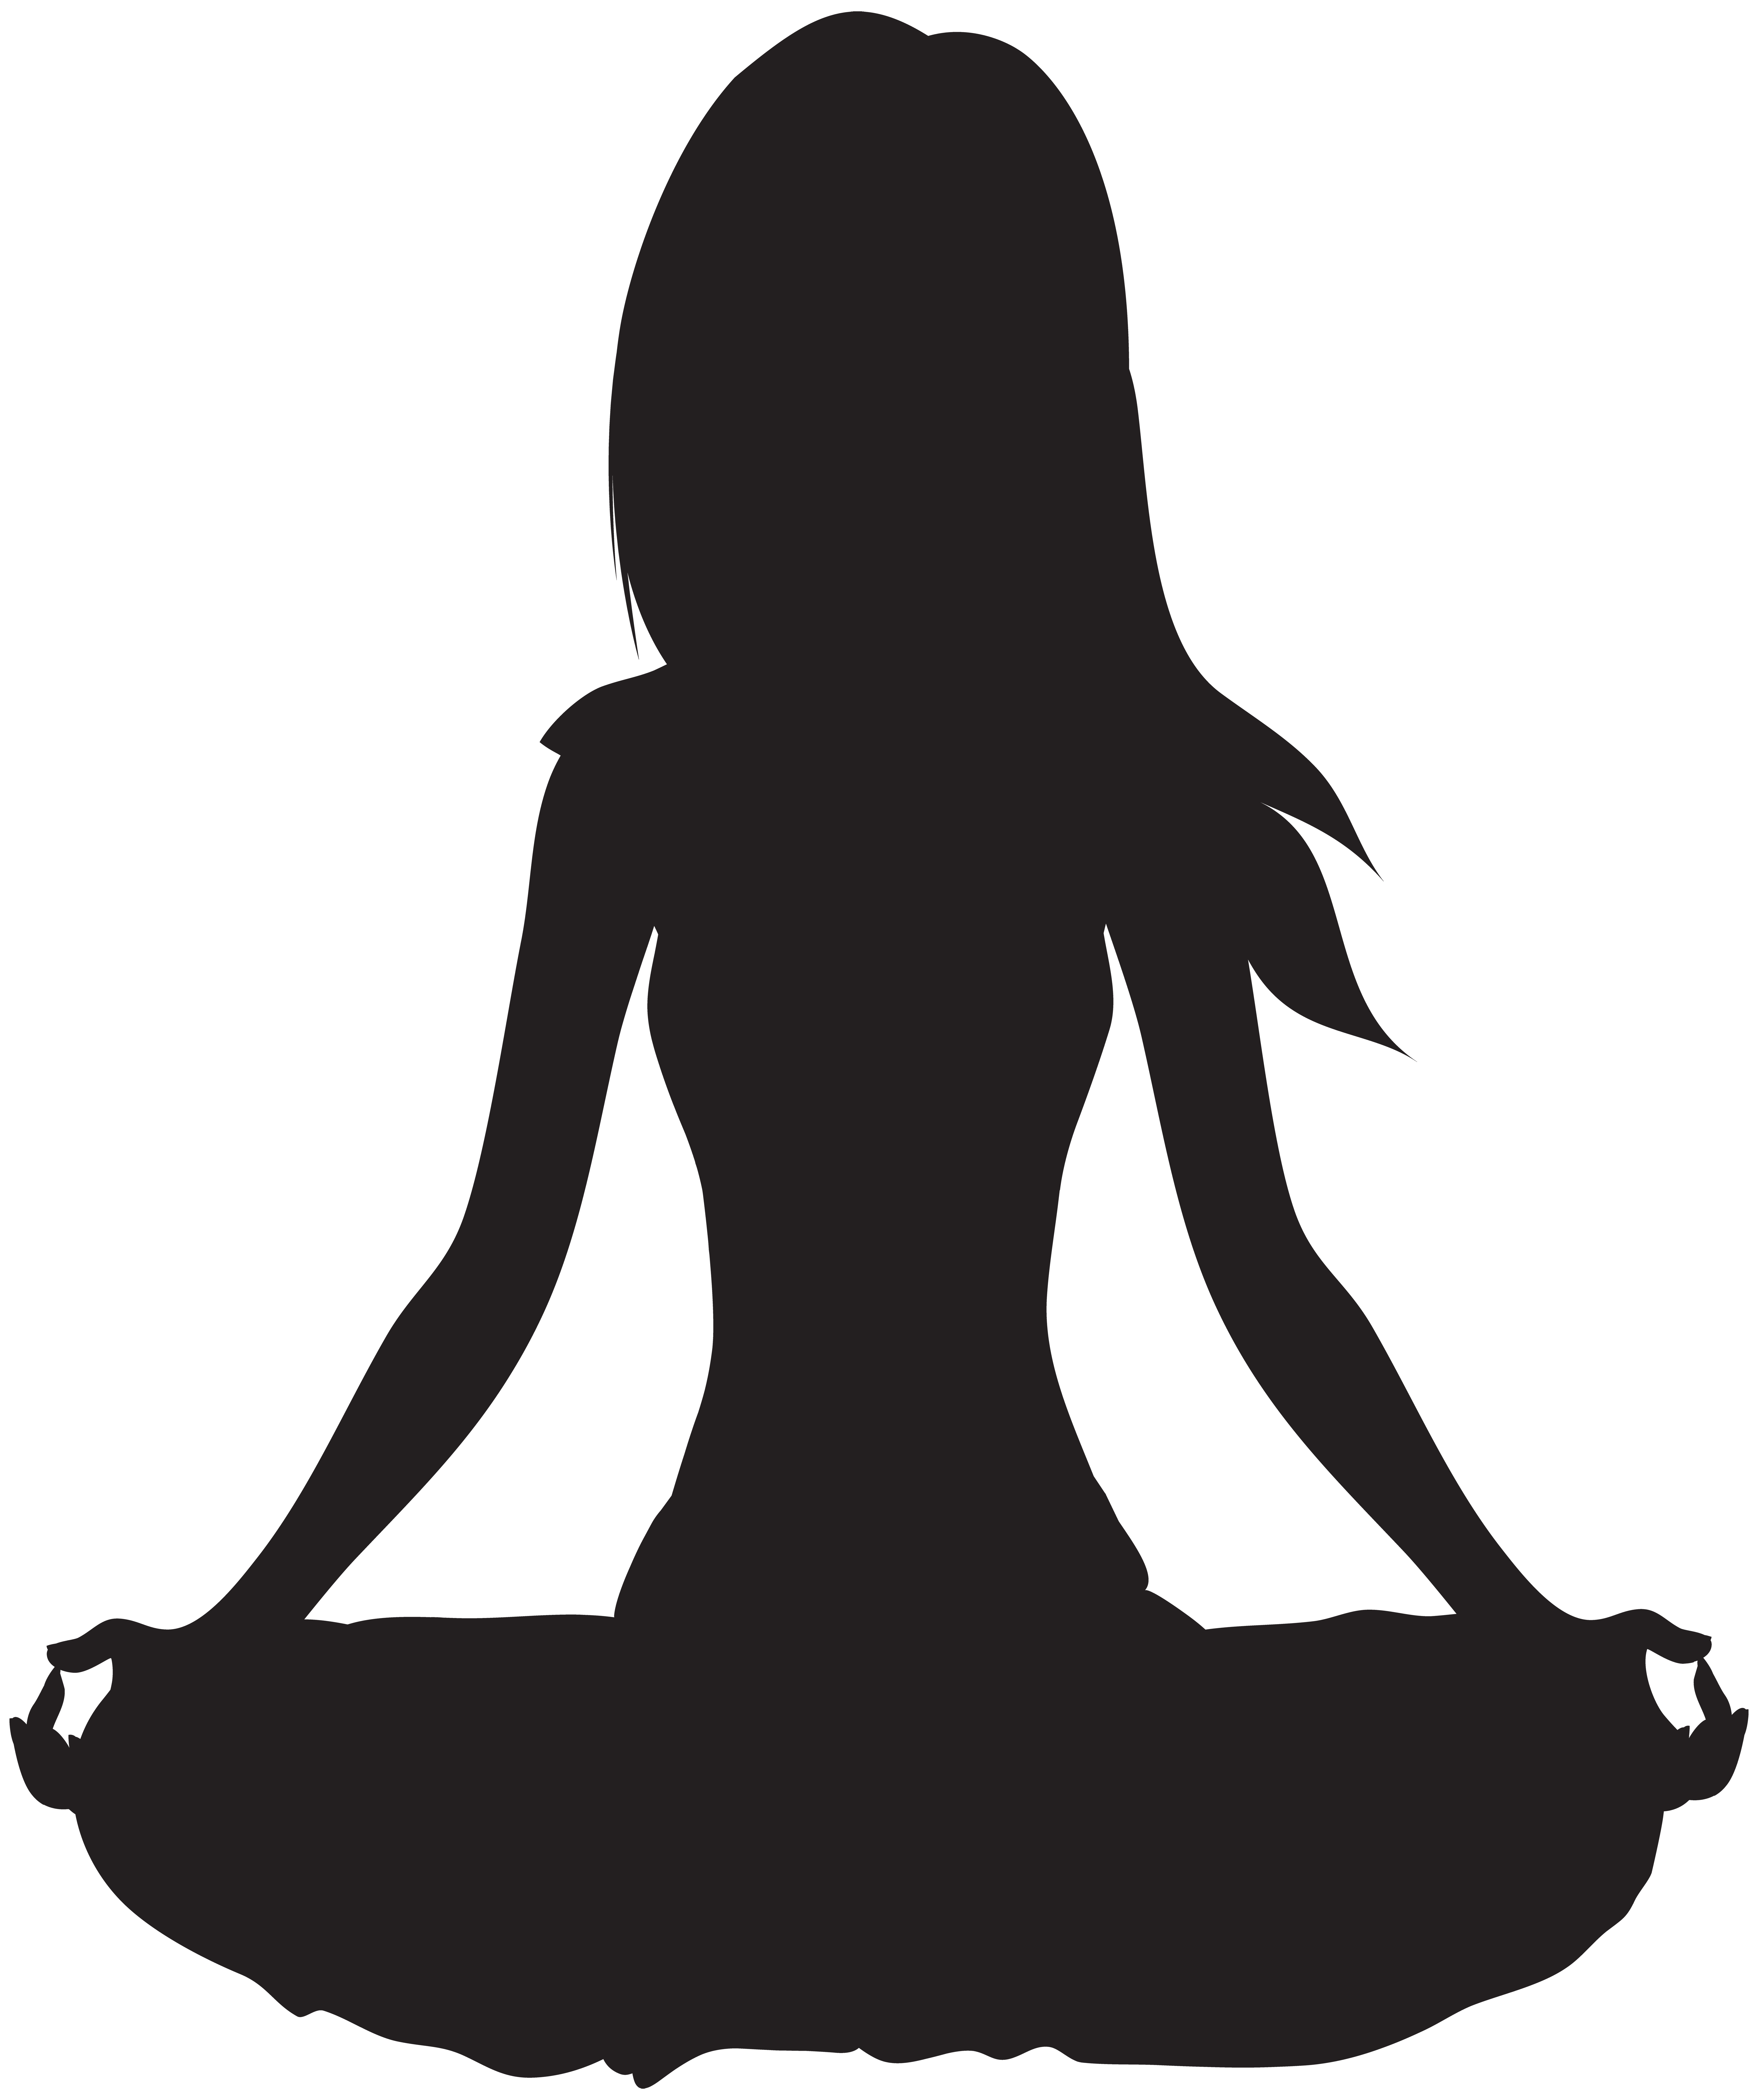 Meditate silhouette png.